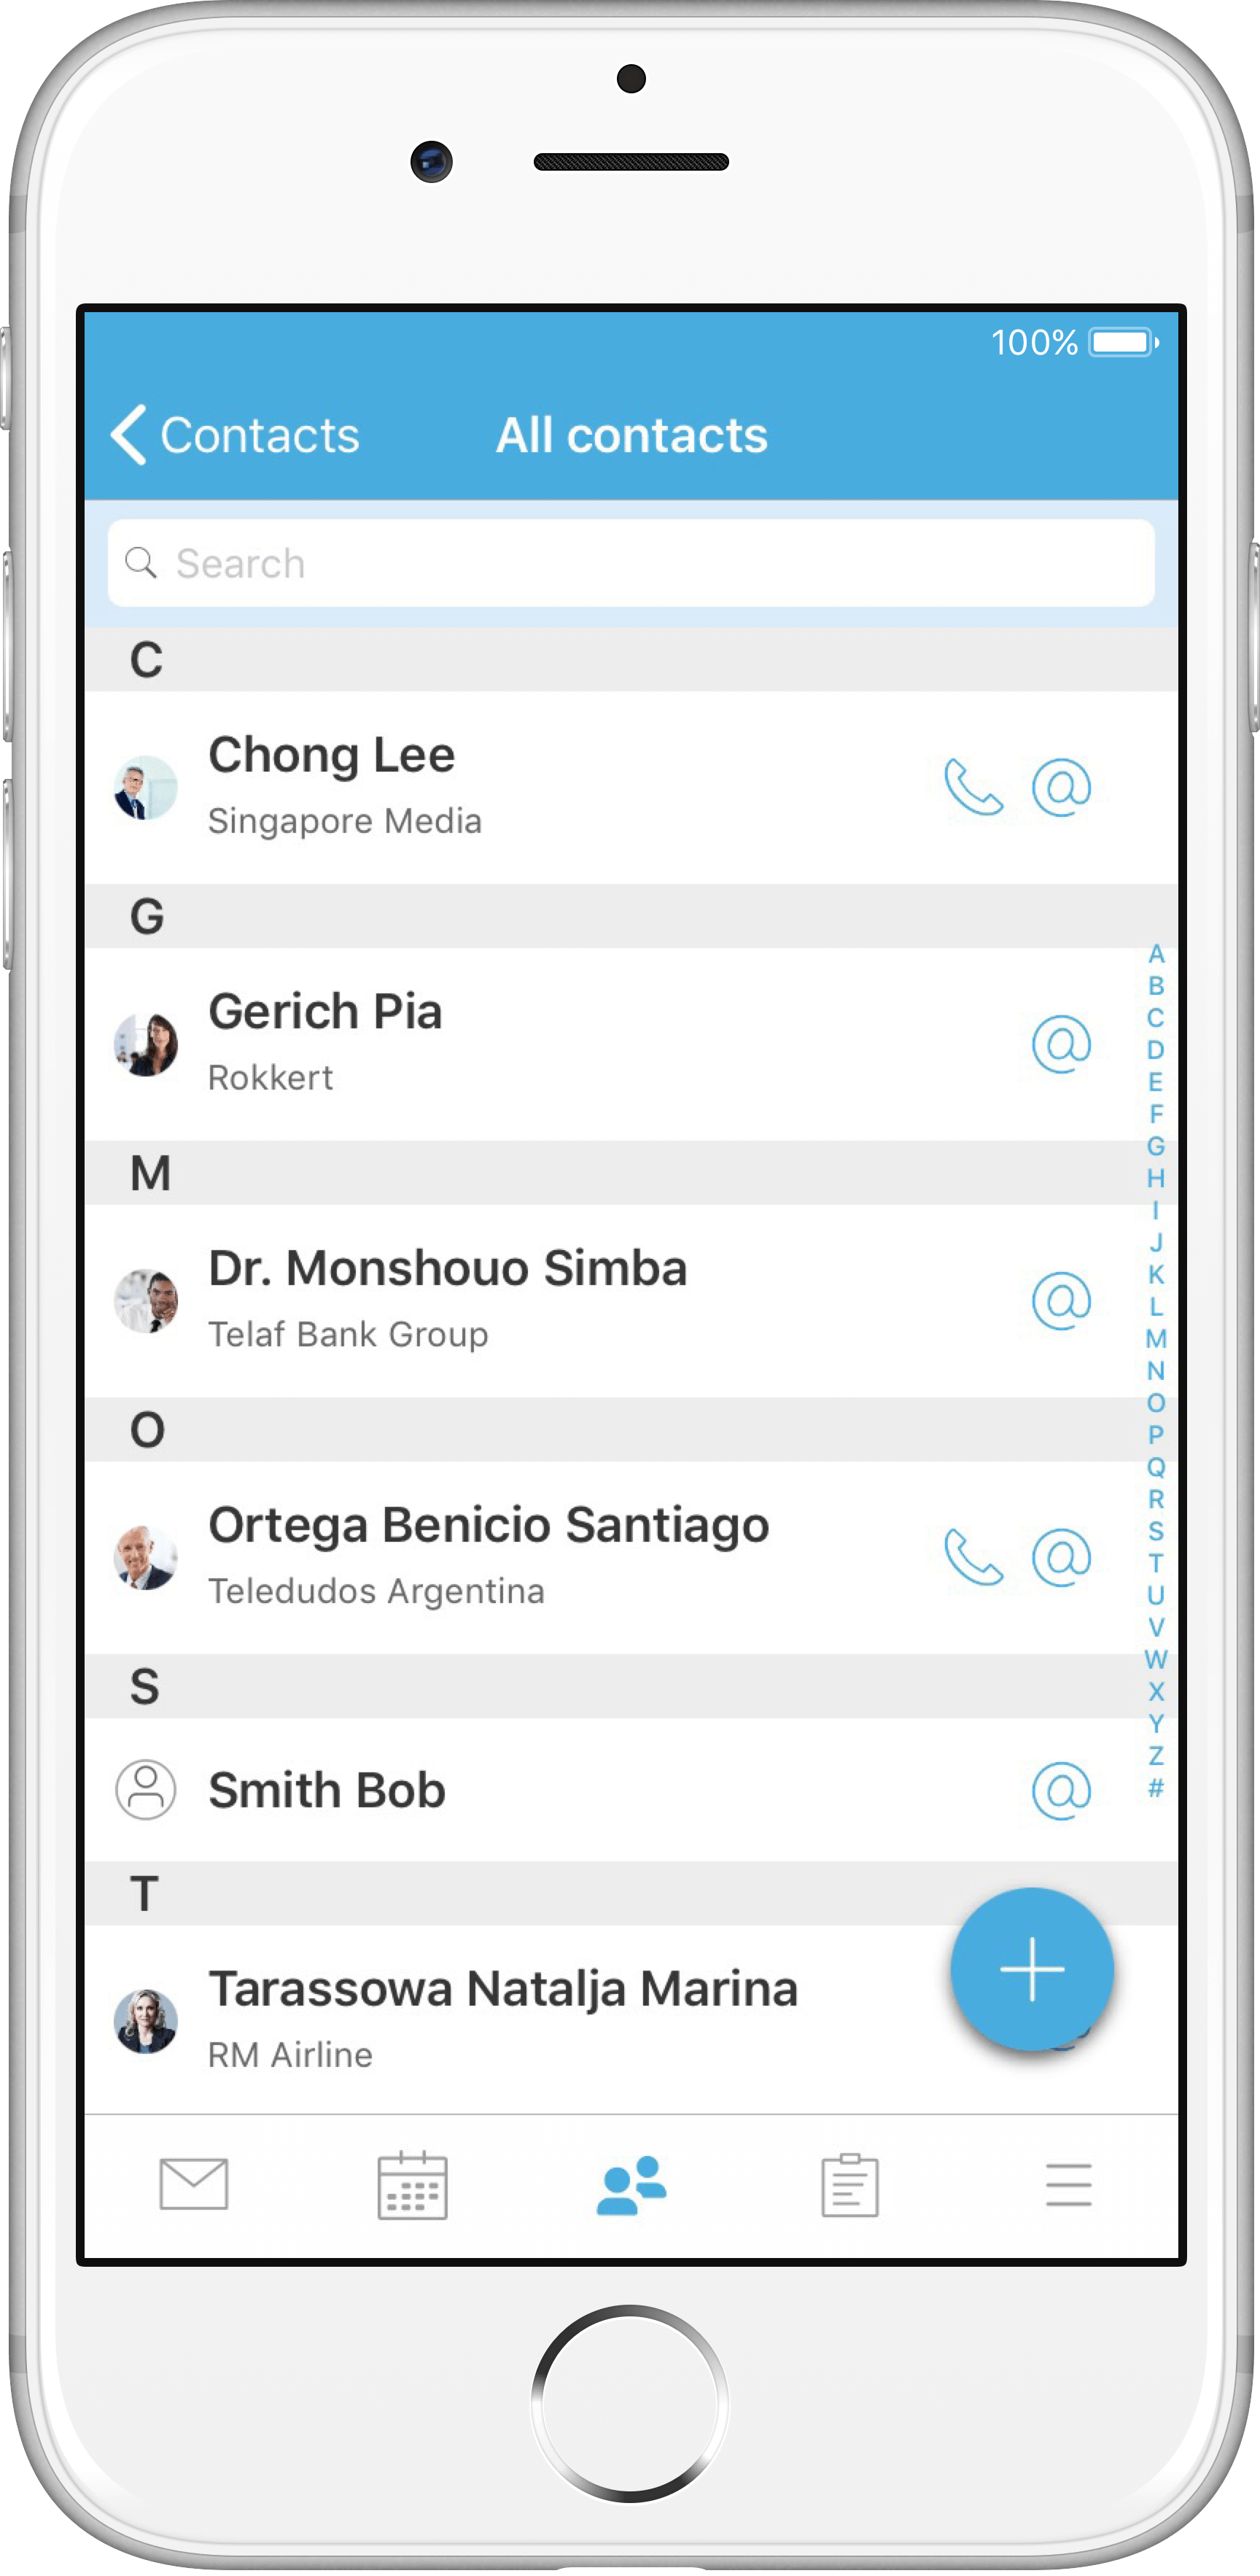 Easily create new contacts via the floating button